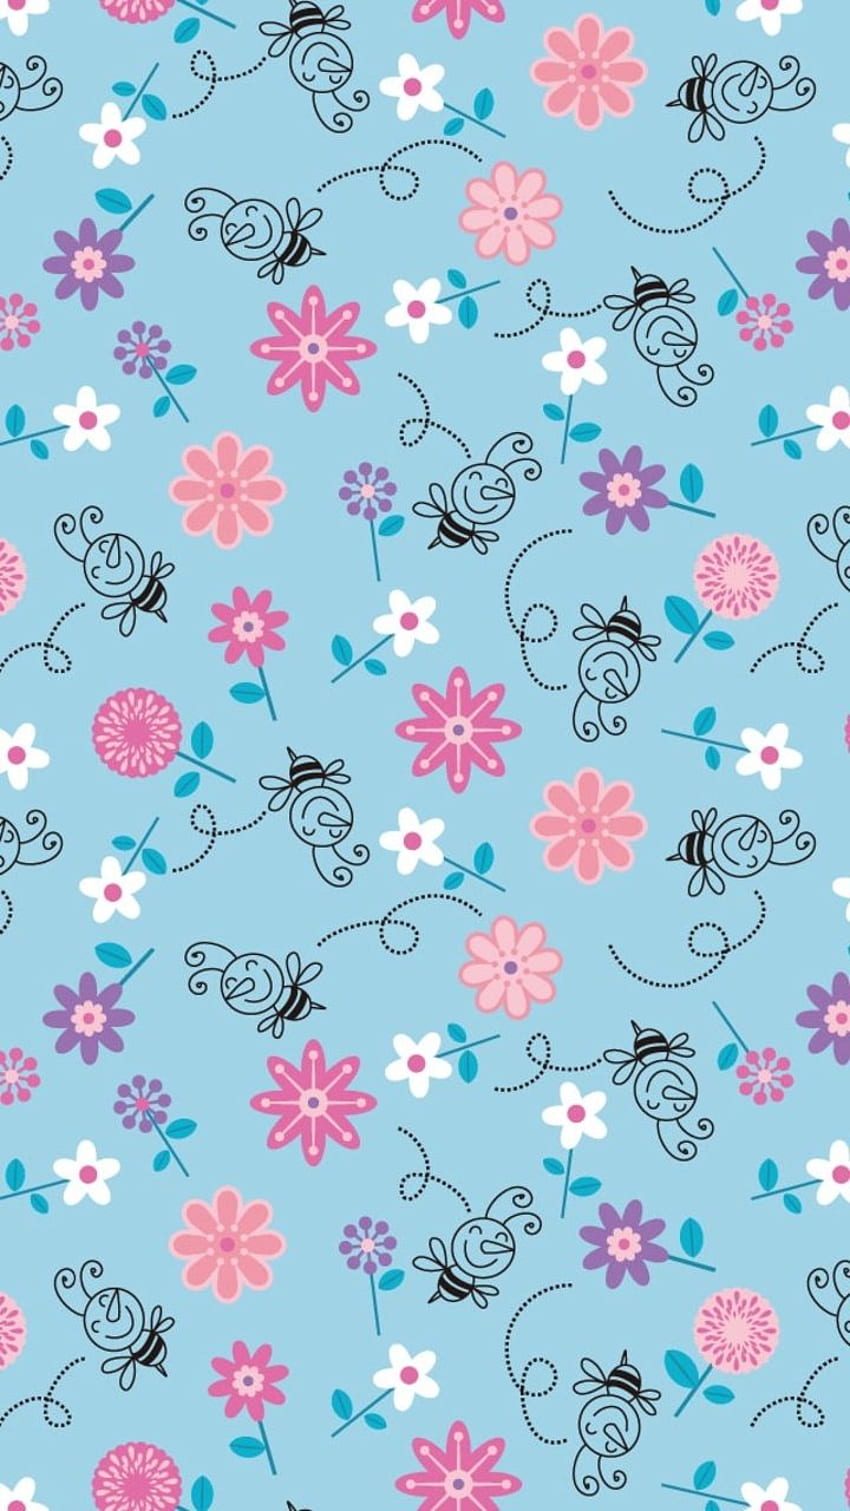 Blue Flower clipart girly flower - Pencil and in color blue flower HD phone wallpaper